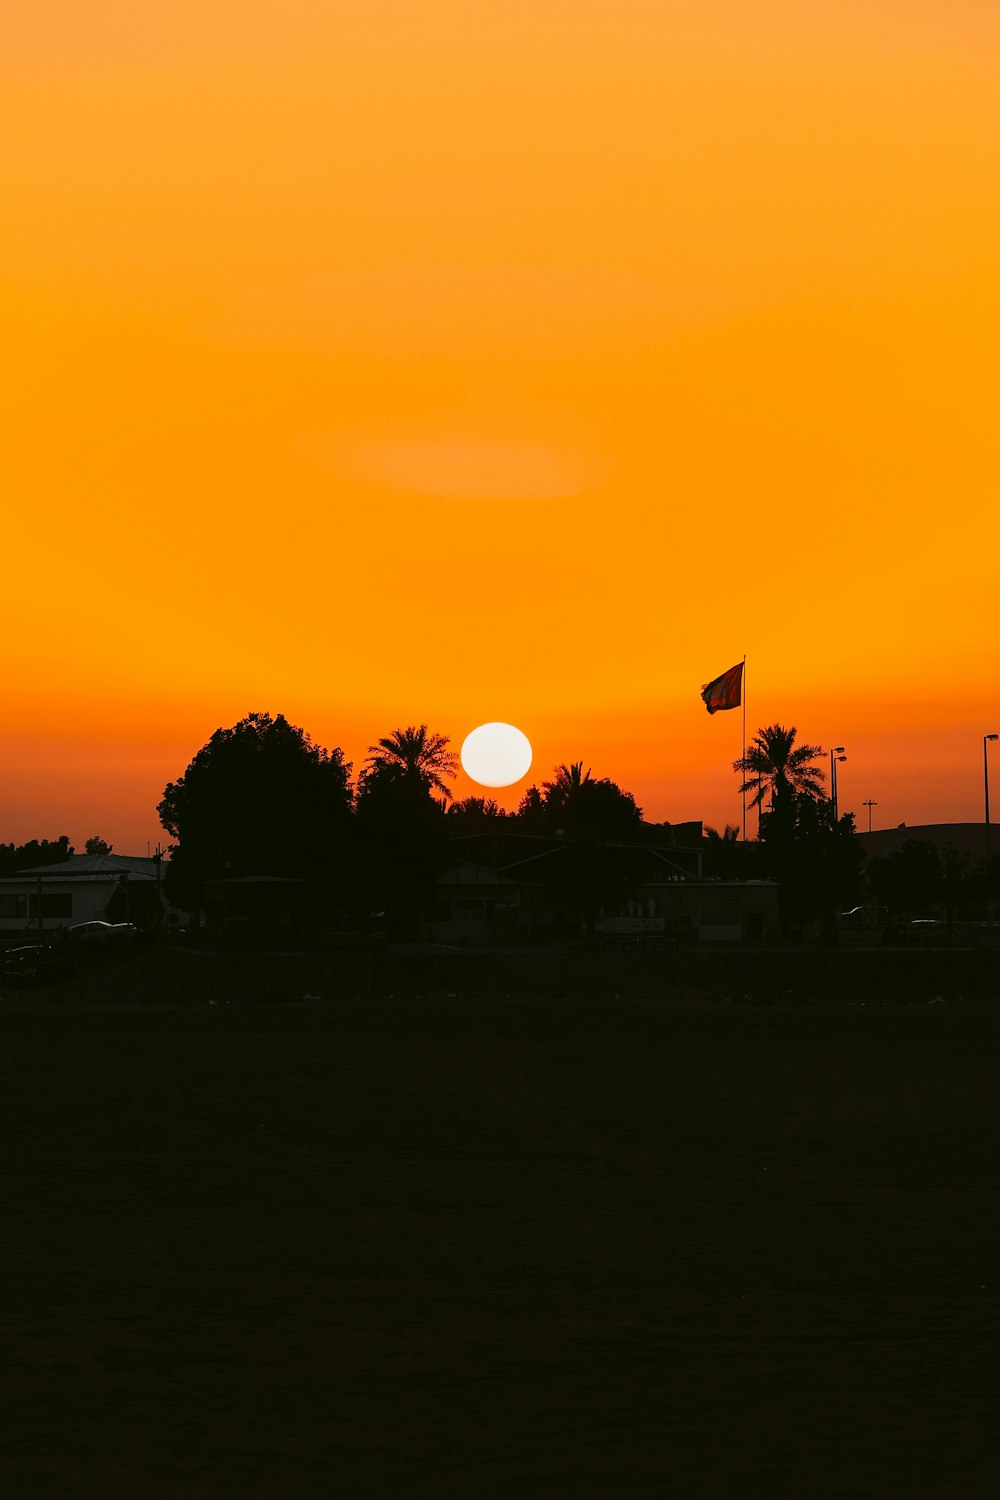 the sun is setting over a field with palm trees